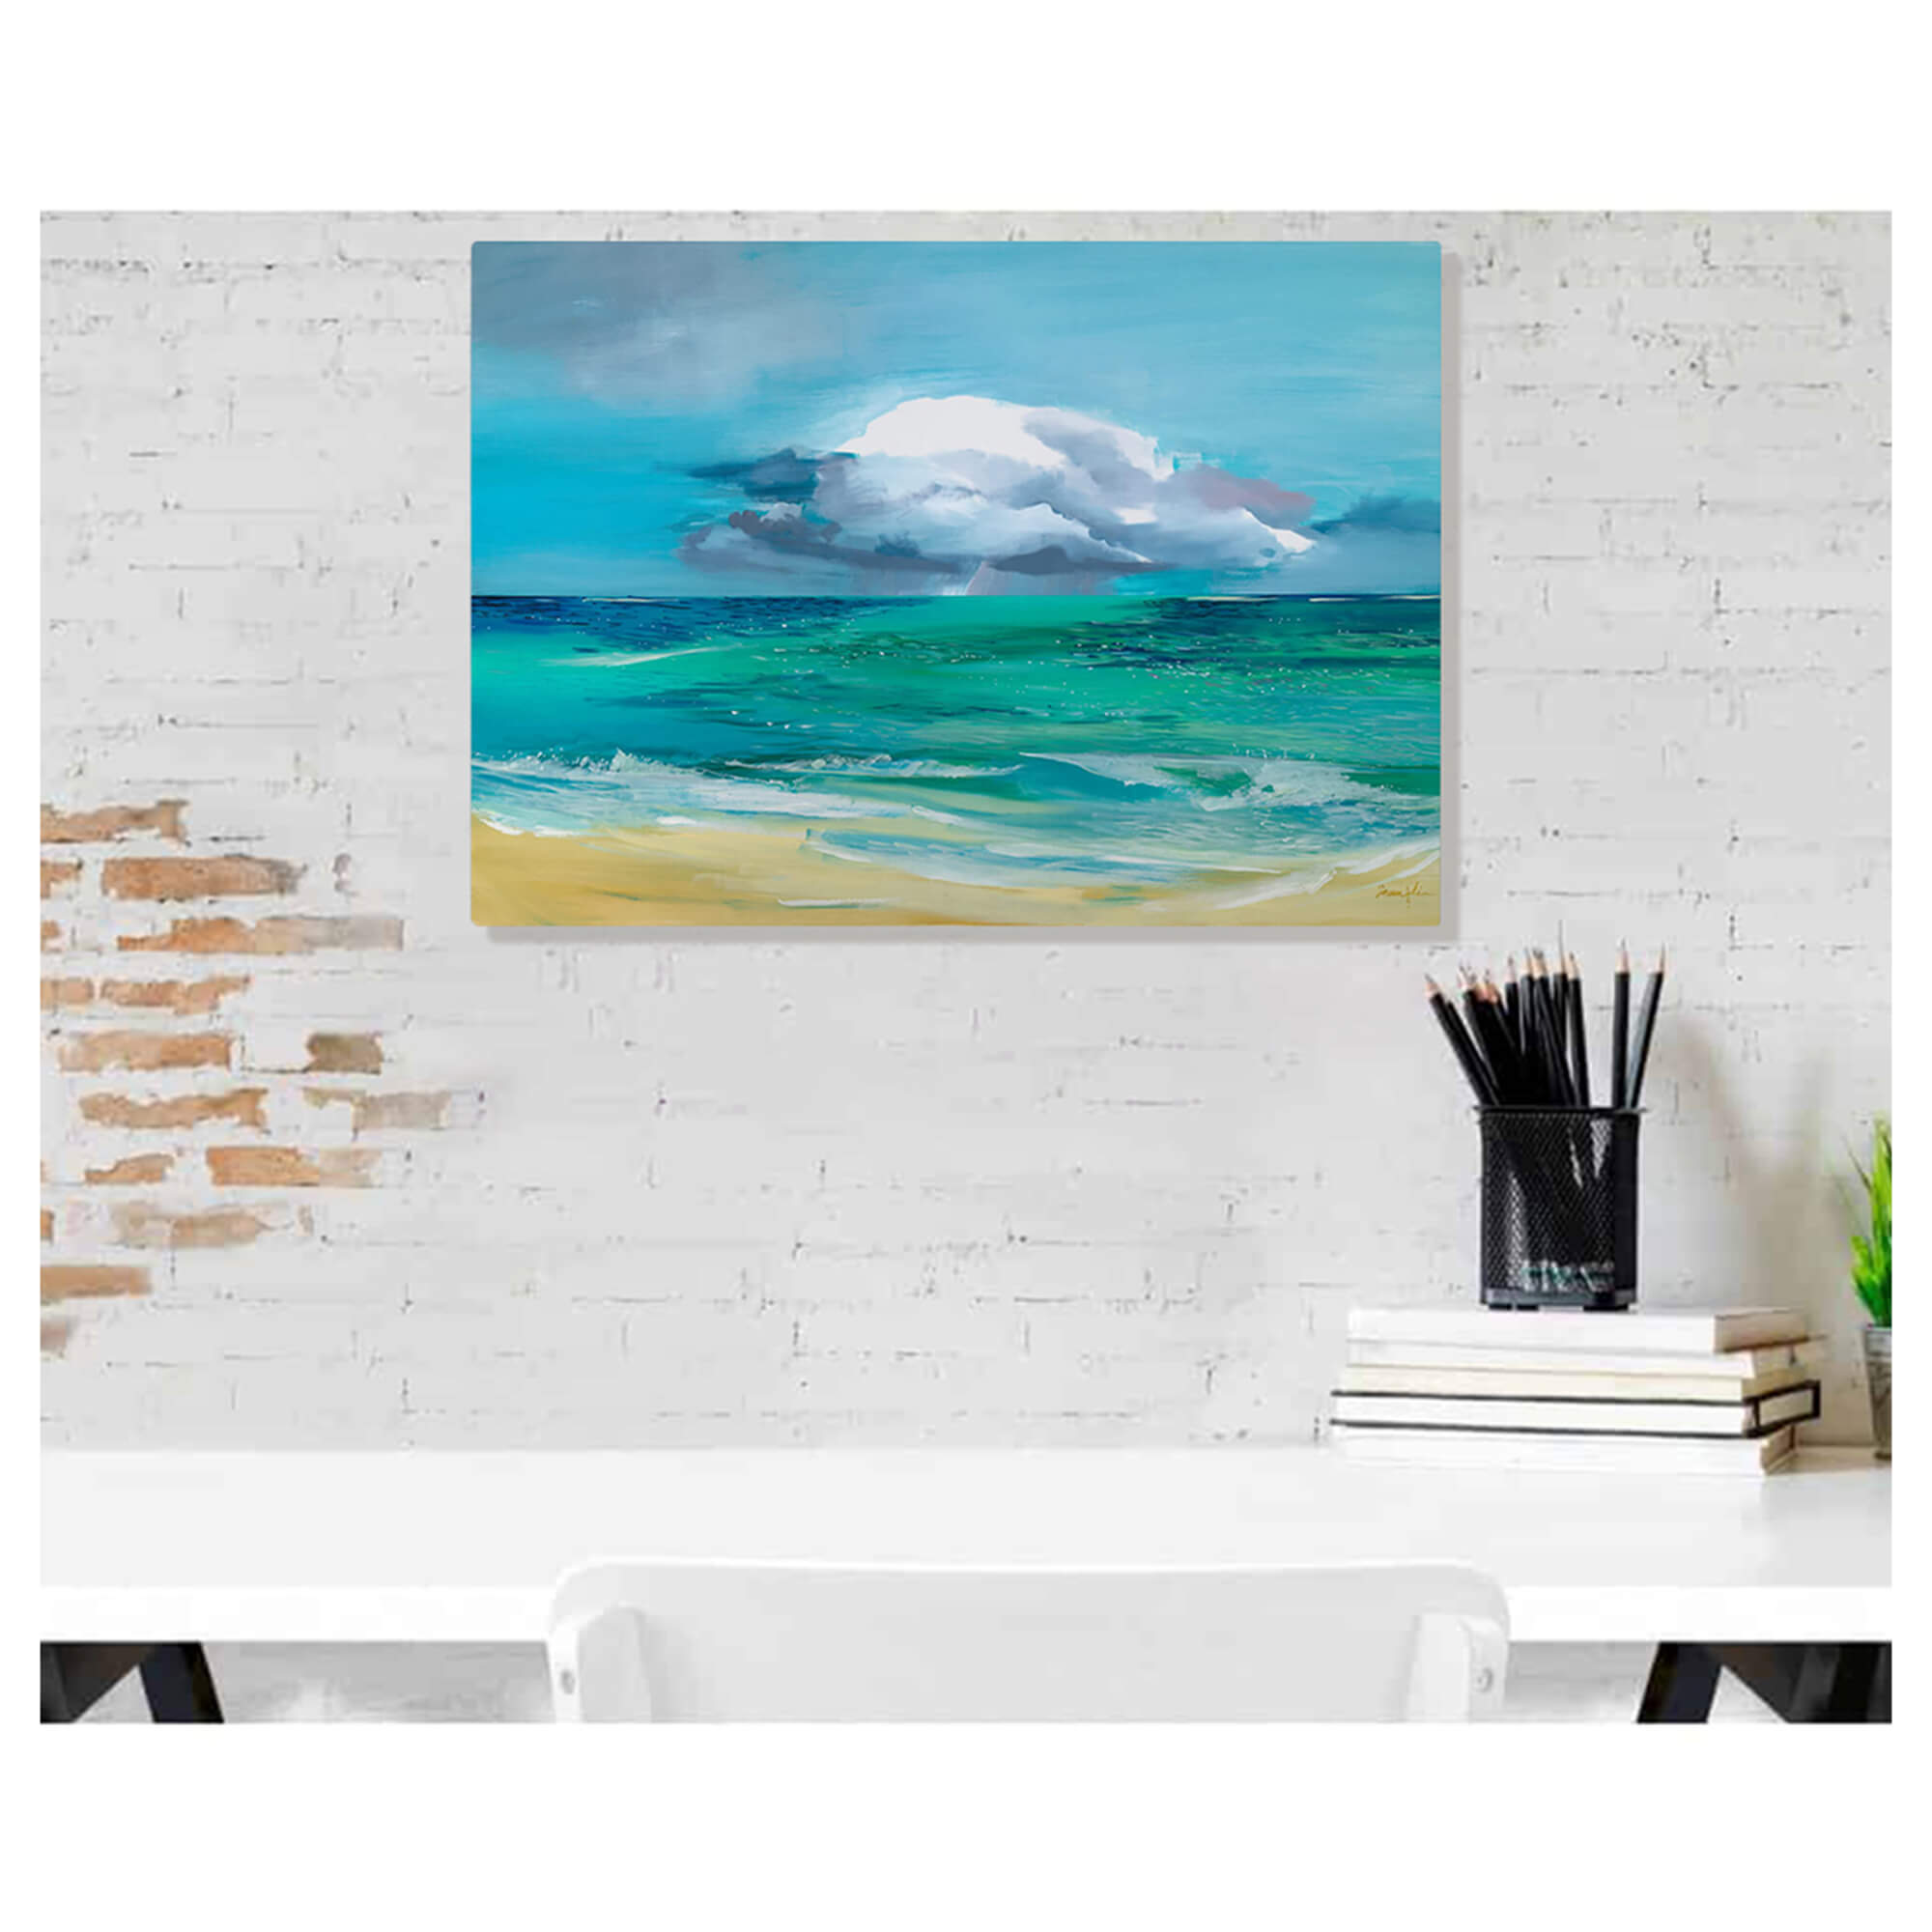 A metal art print depicting calm tranquil waters leading to a beach oasis by Hawaii artist Saumolia Puapuaga